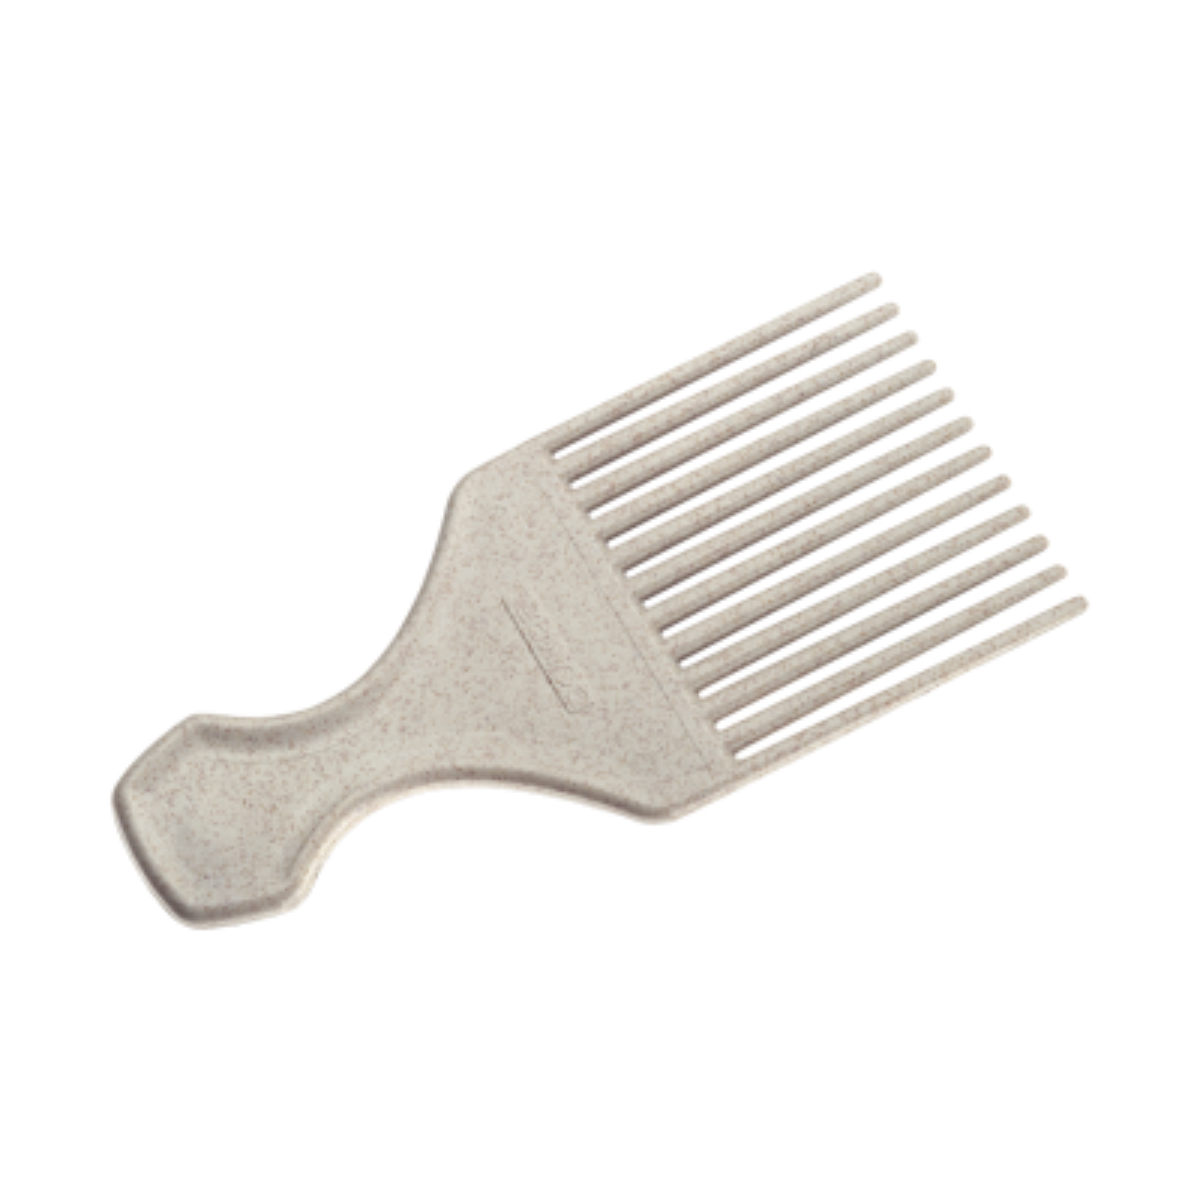 Dompel Eco Comb Bundle, one Hair Pick and one Large Tooth, with a modern design, it is made with rice husk residues and polypropylene. - depilcompany